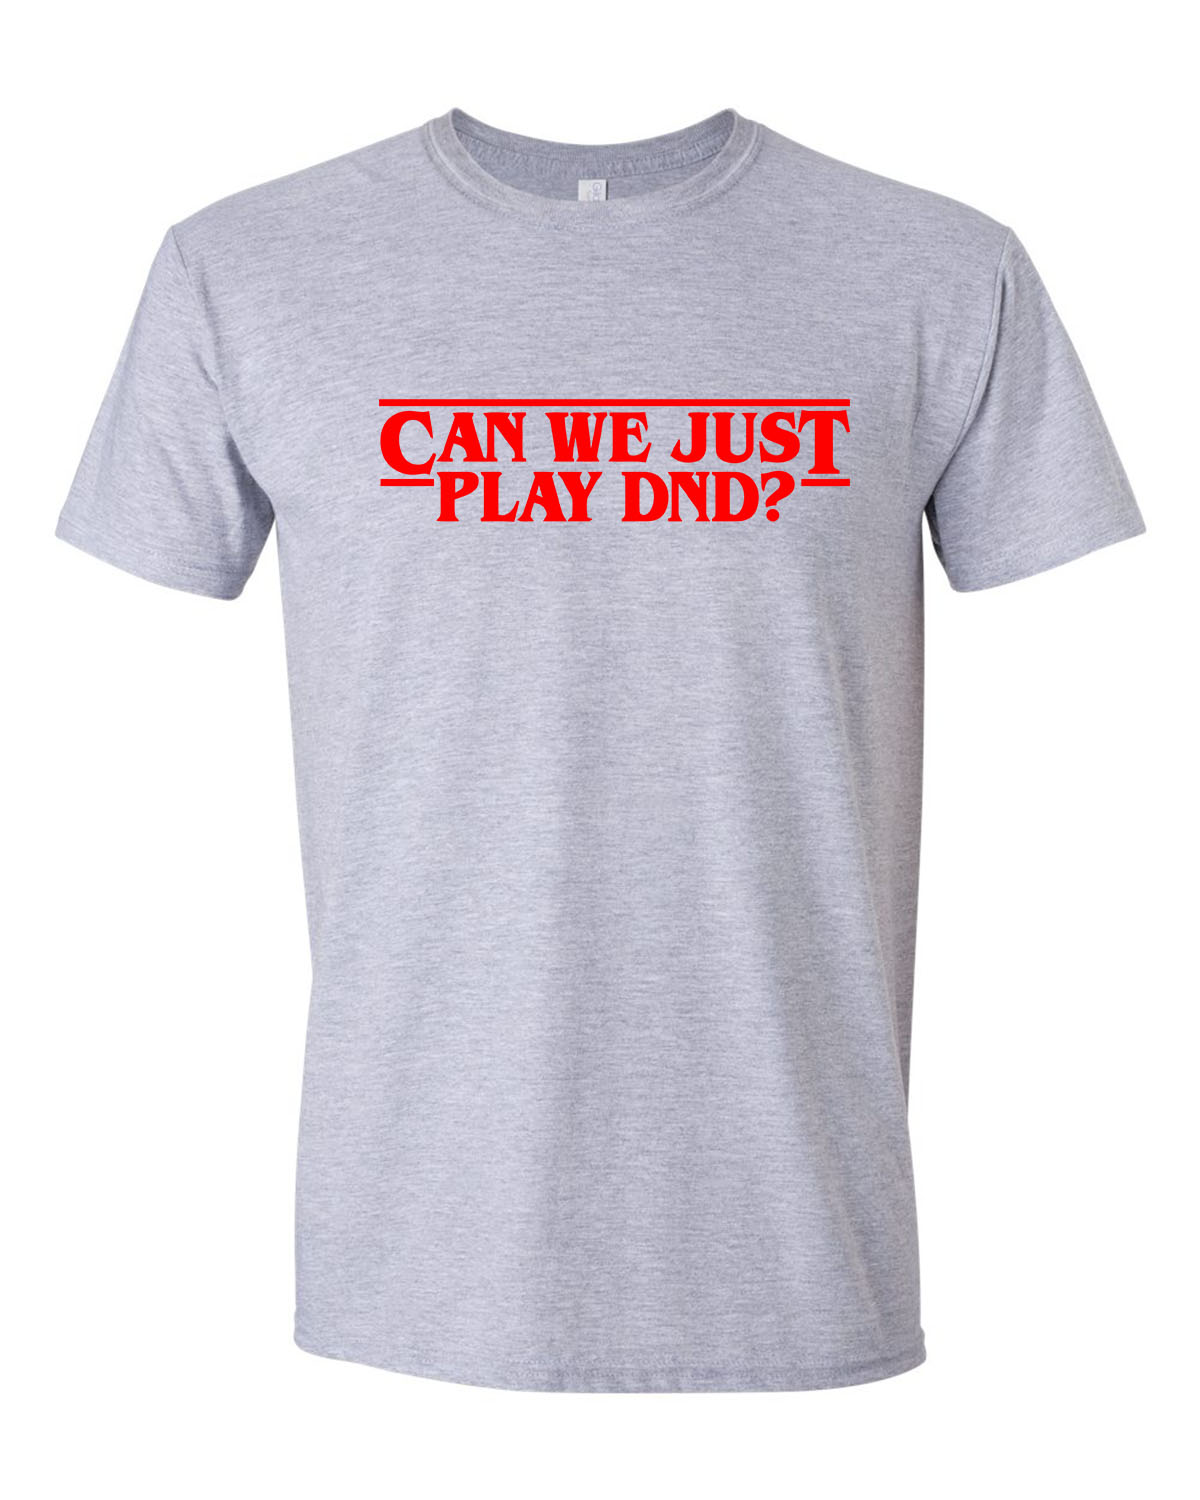 Can We Just Play DnD? Dungeons and Dragons Unisex T-Shirt